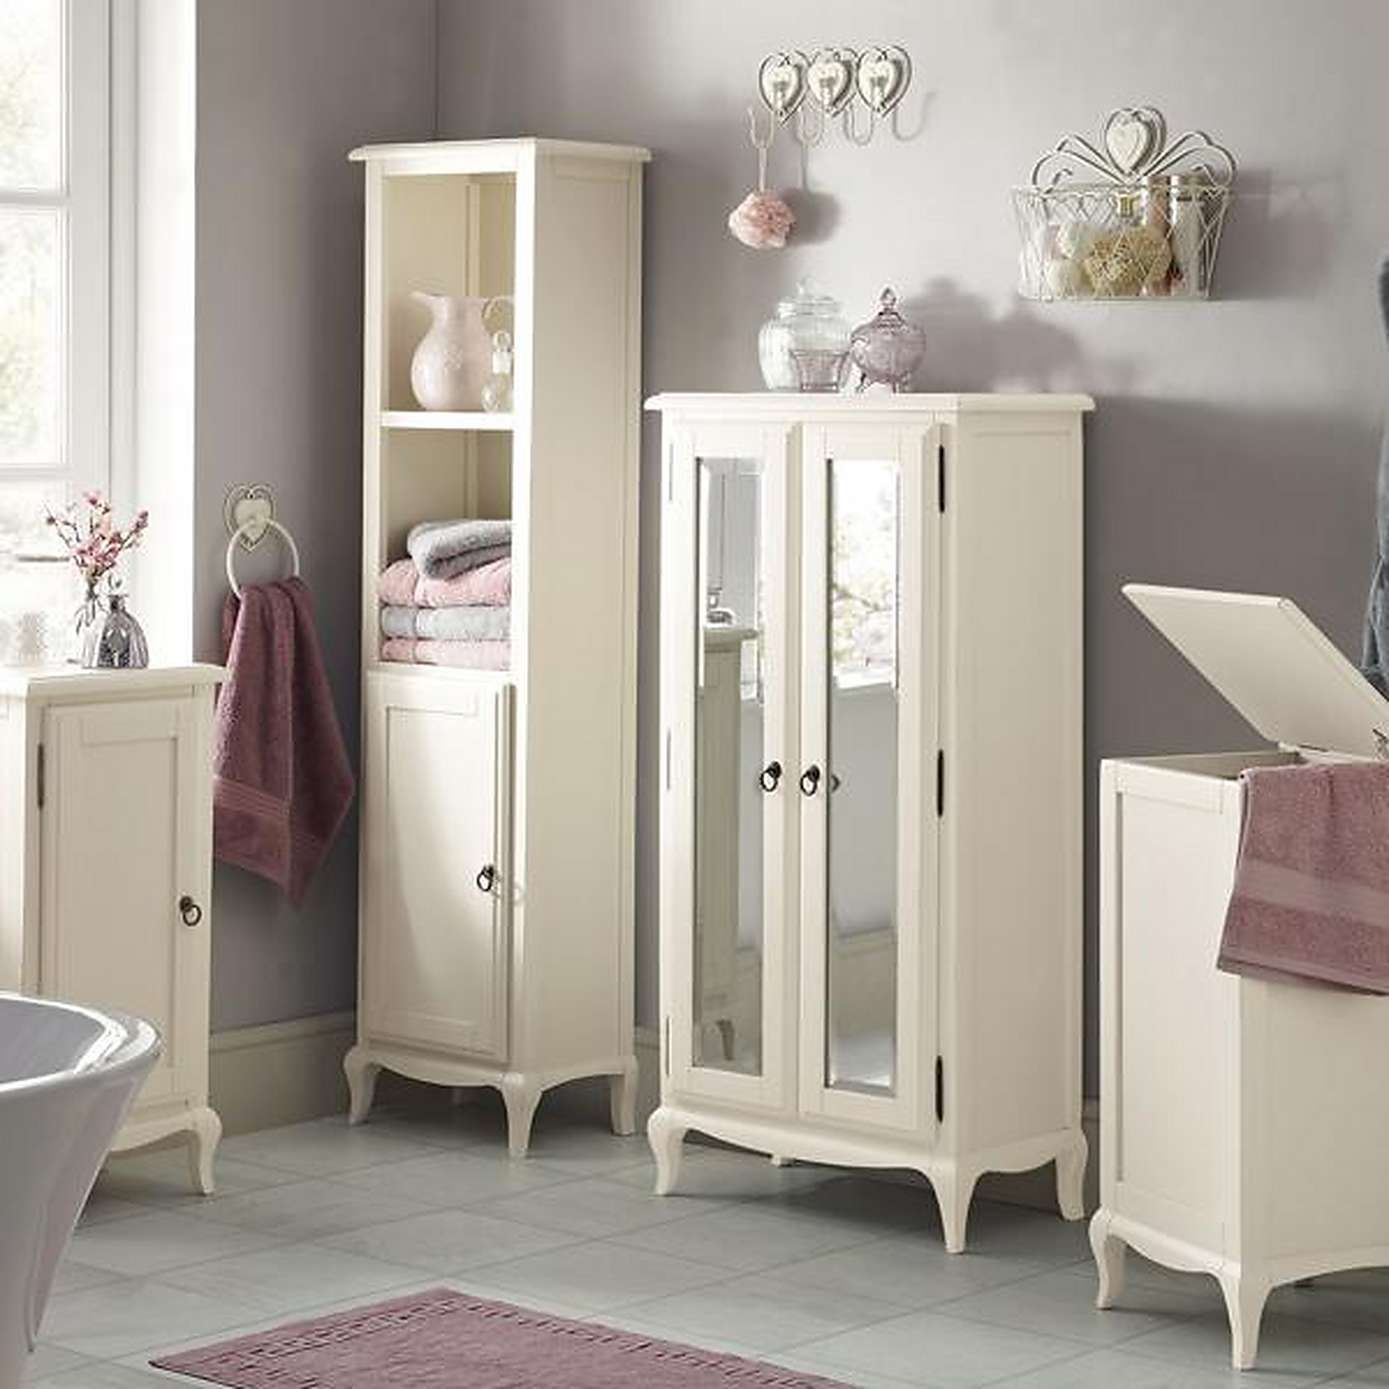 Florence Bathroom Furniture Collection Dunelm Home Decoration in dimensions 1389 X 1389